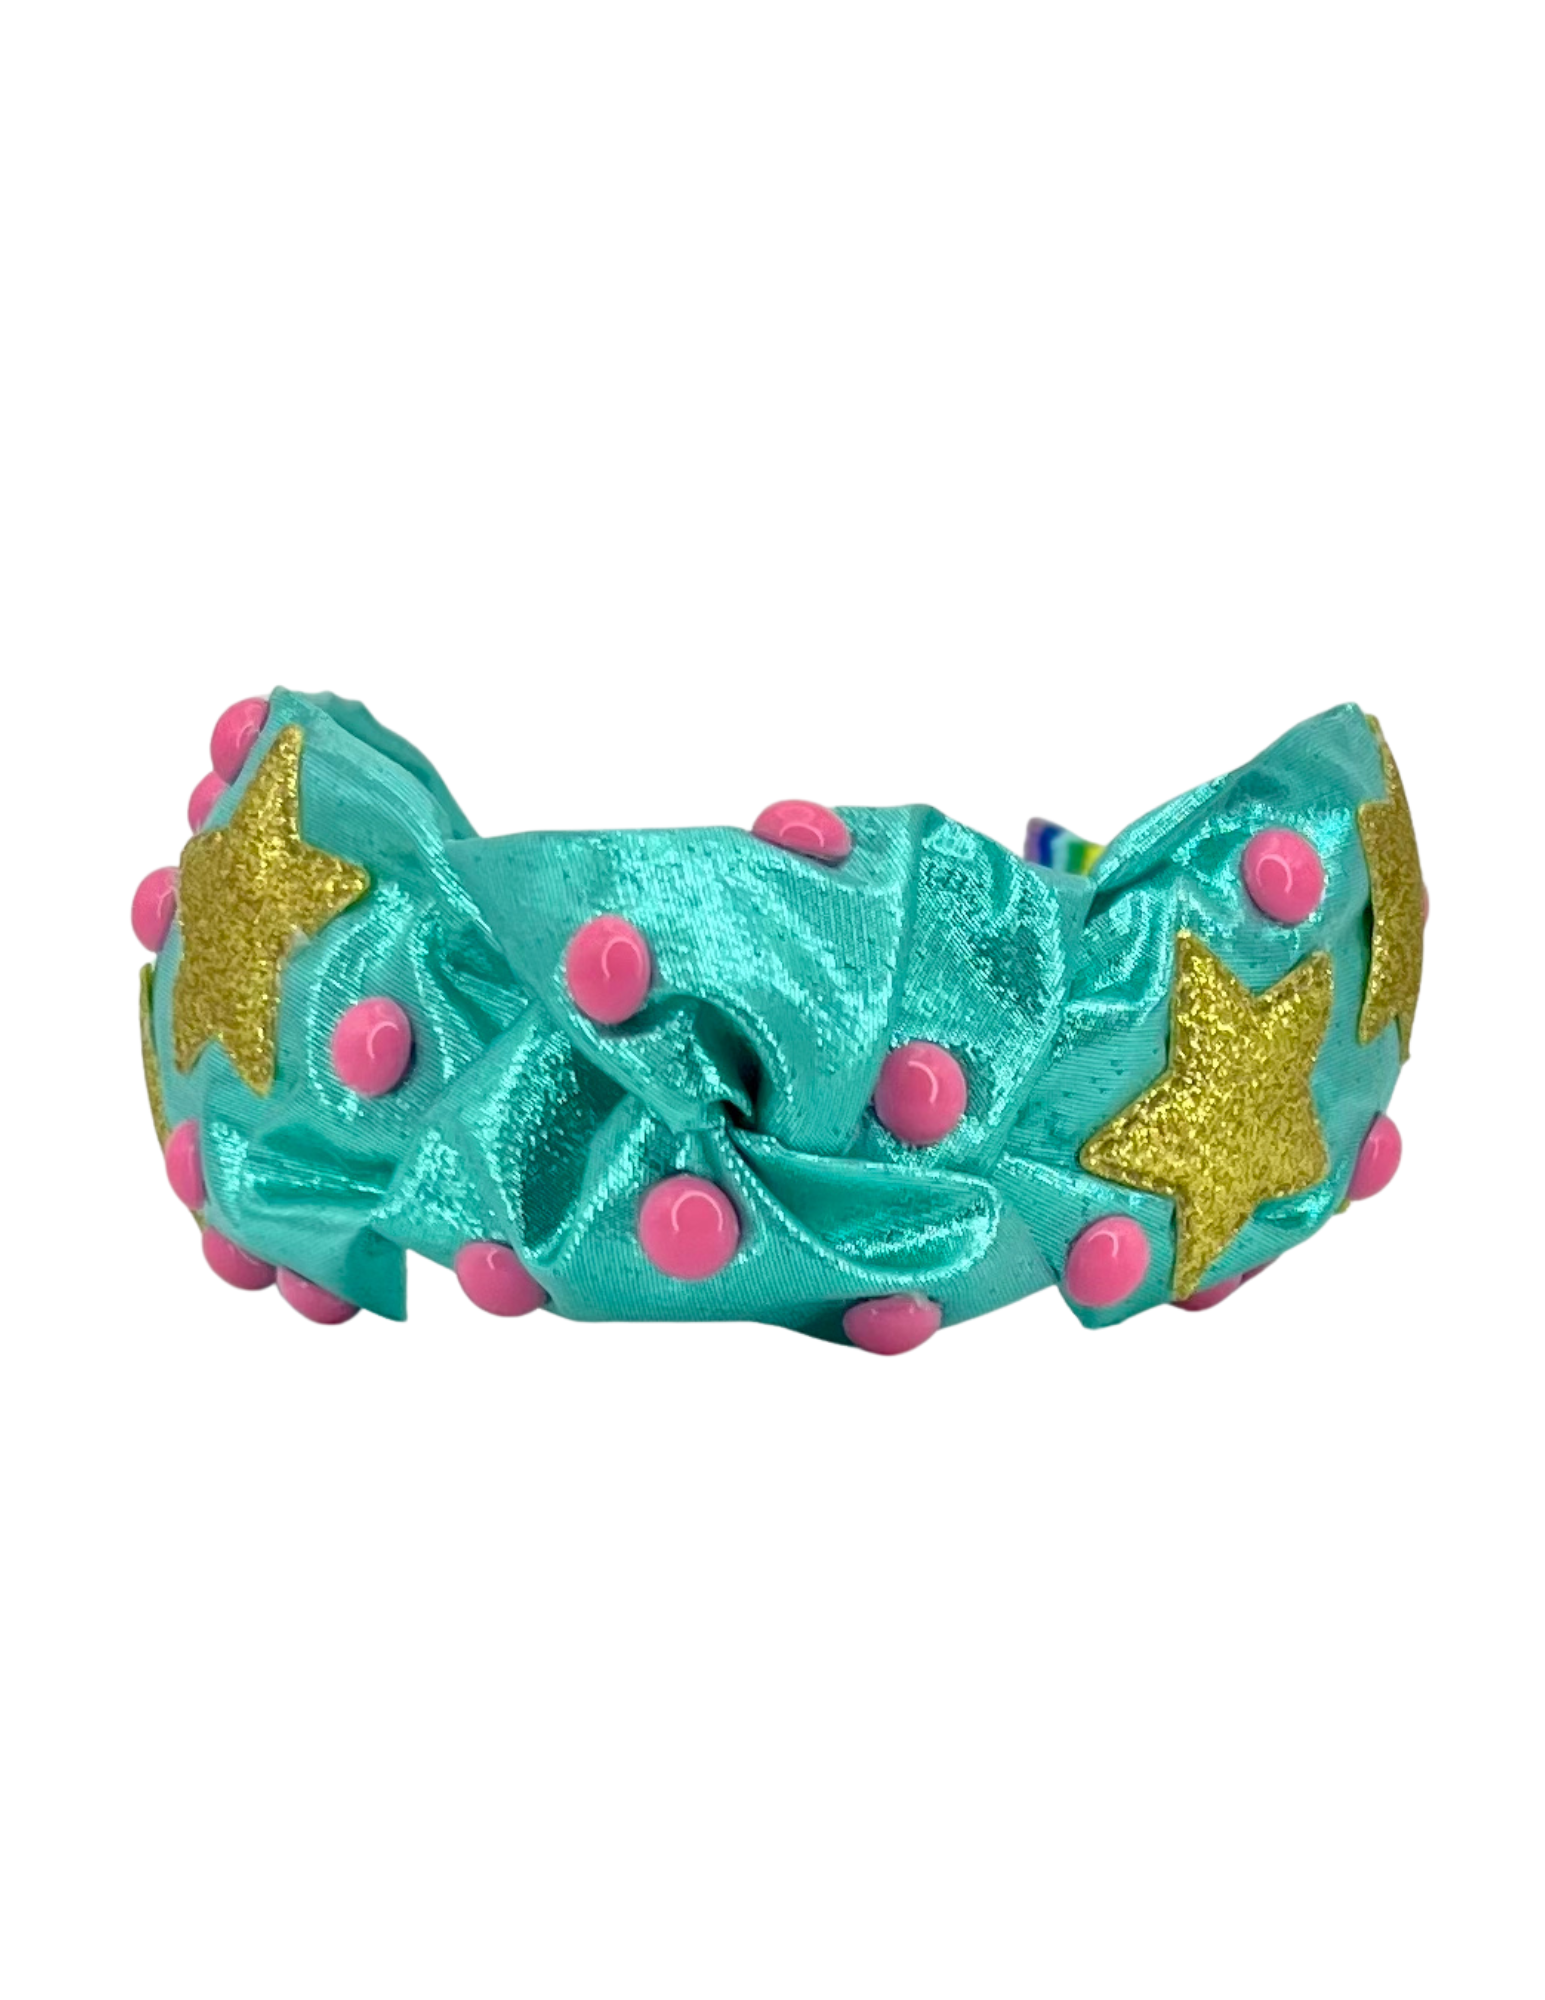 Teal Lame with Gold Stars and Pink